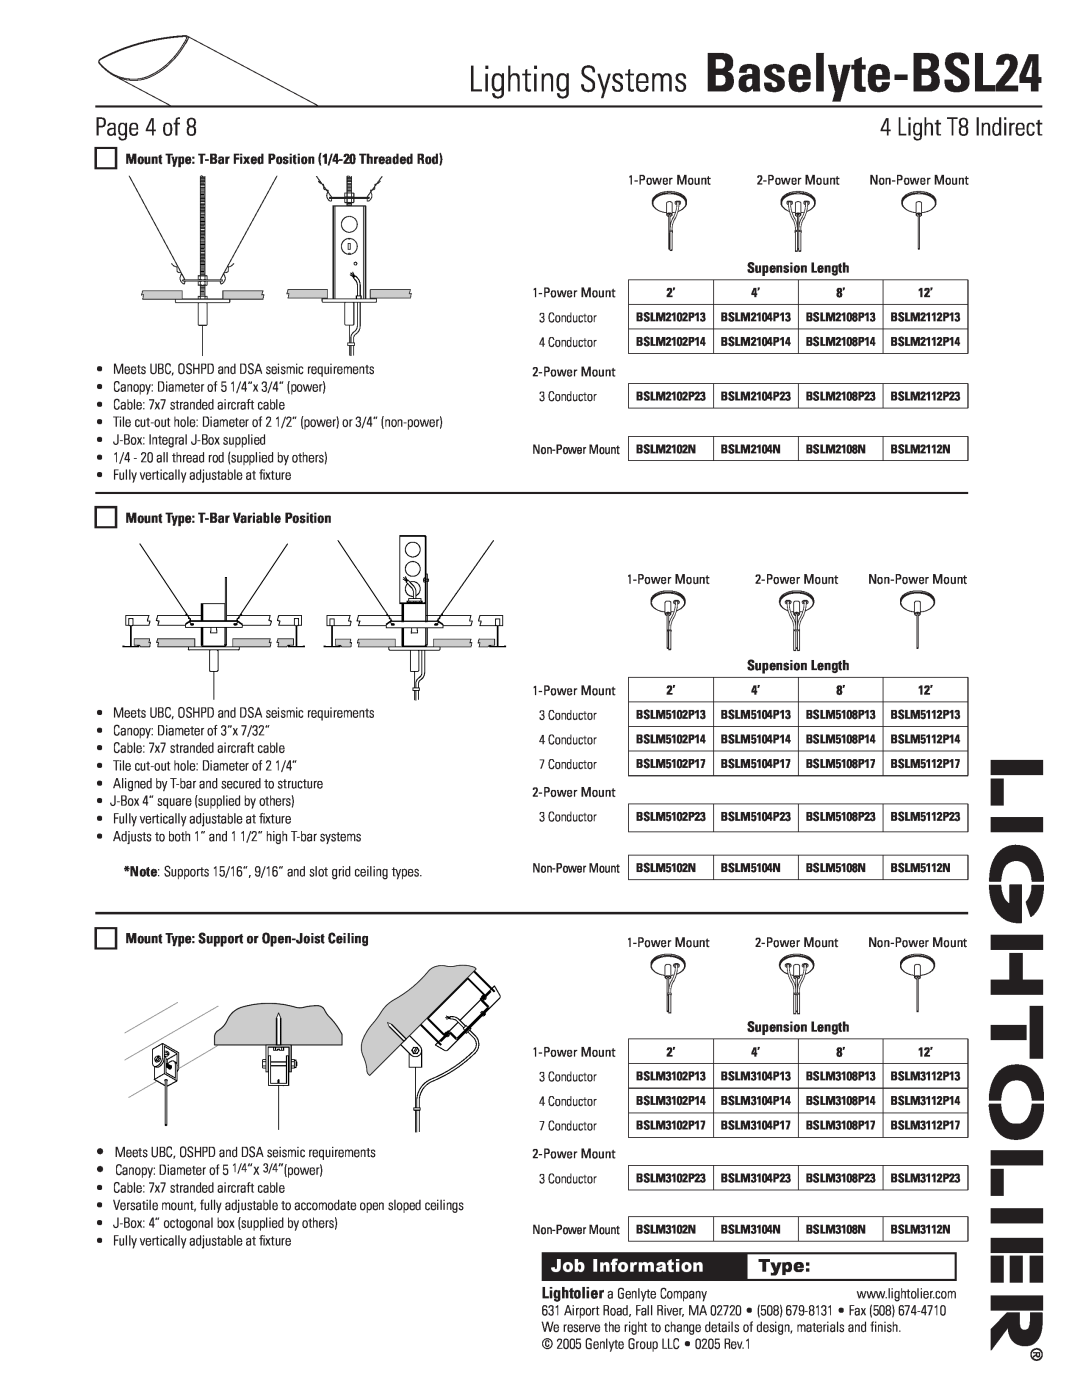 Lightolier Baselyte-BSL24 Page of, Mount Type T-BarVariable Position, Mount Type Support or Open-JoistCeiling 